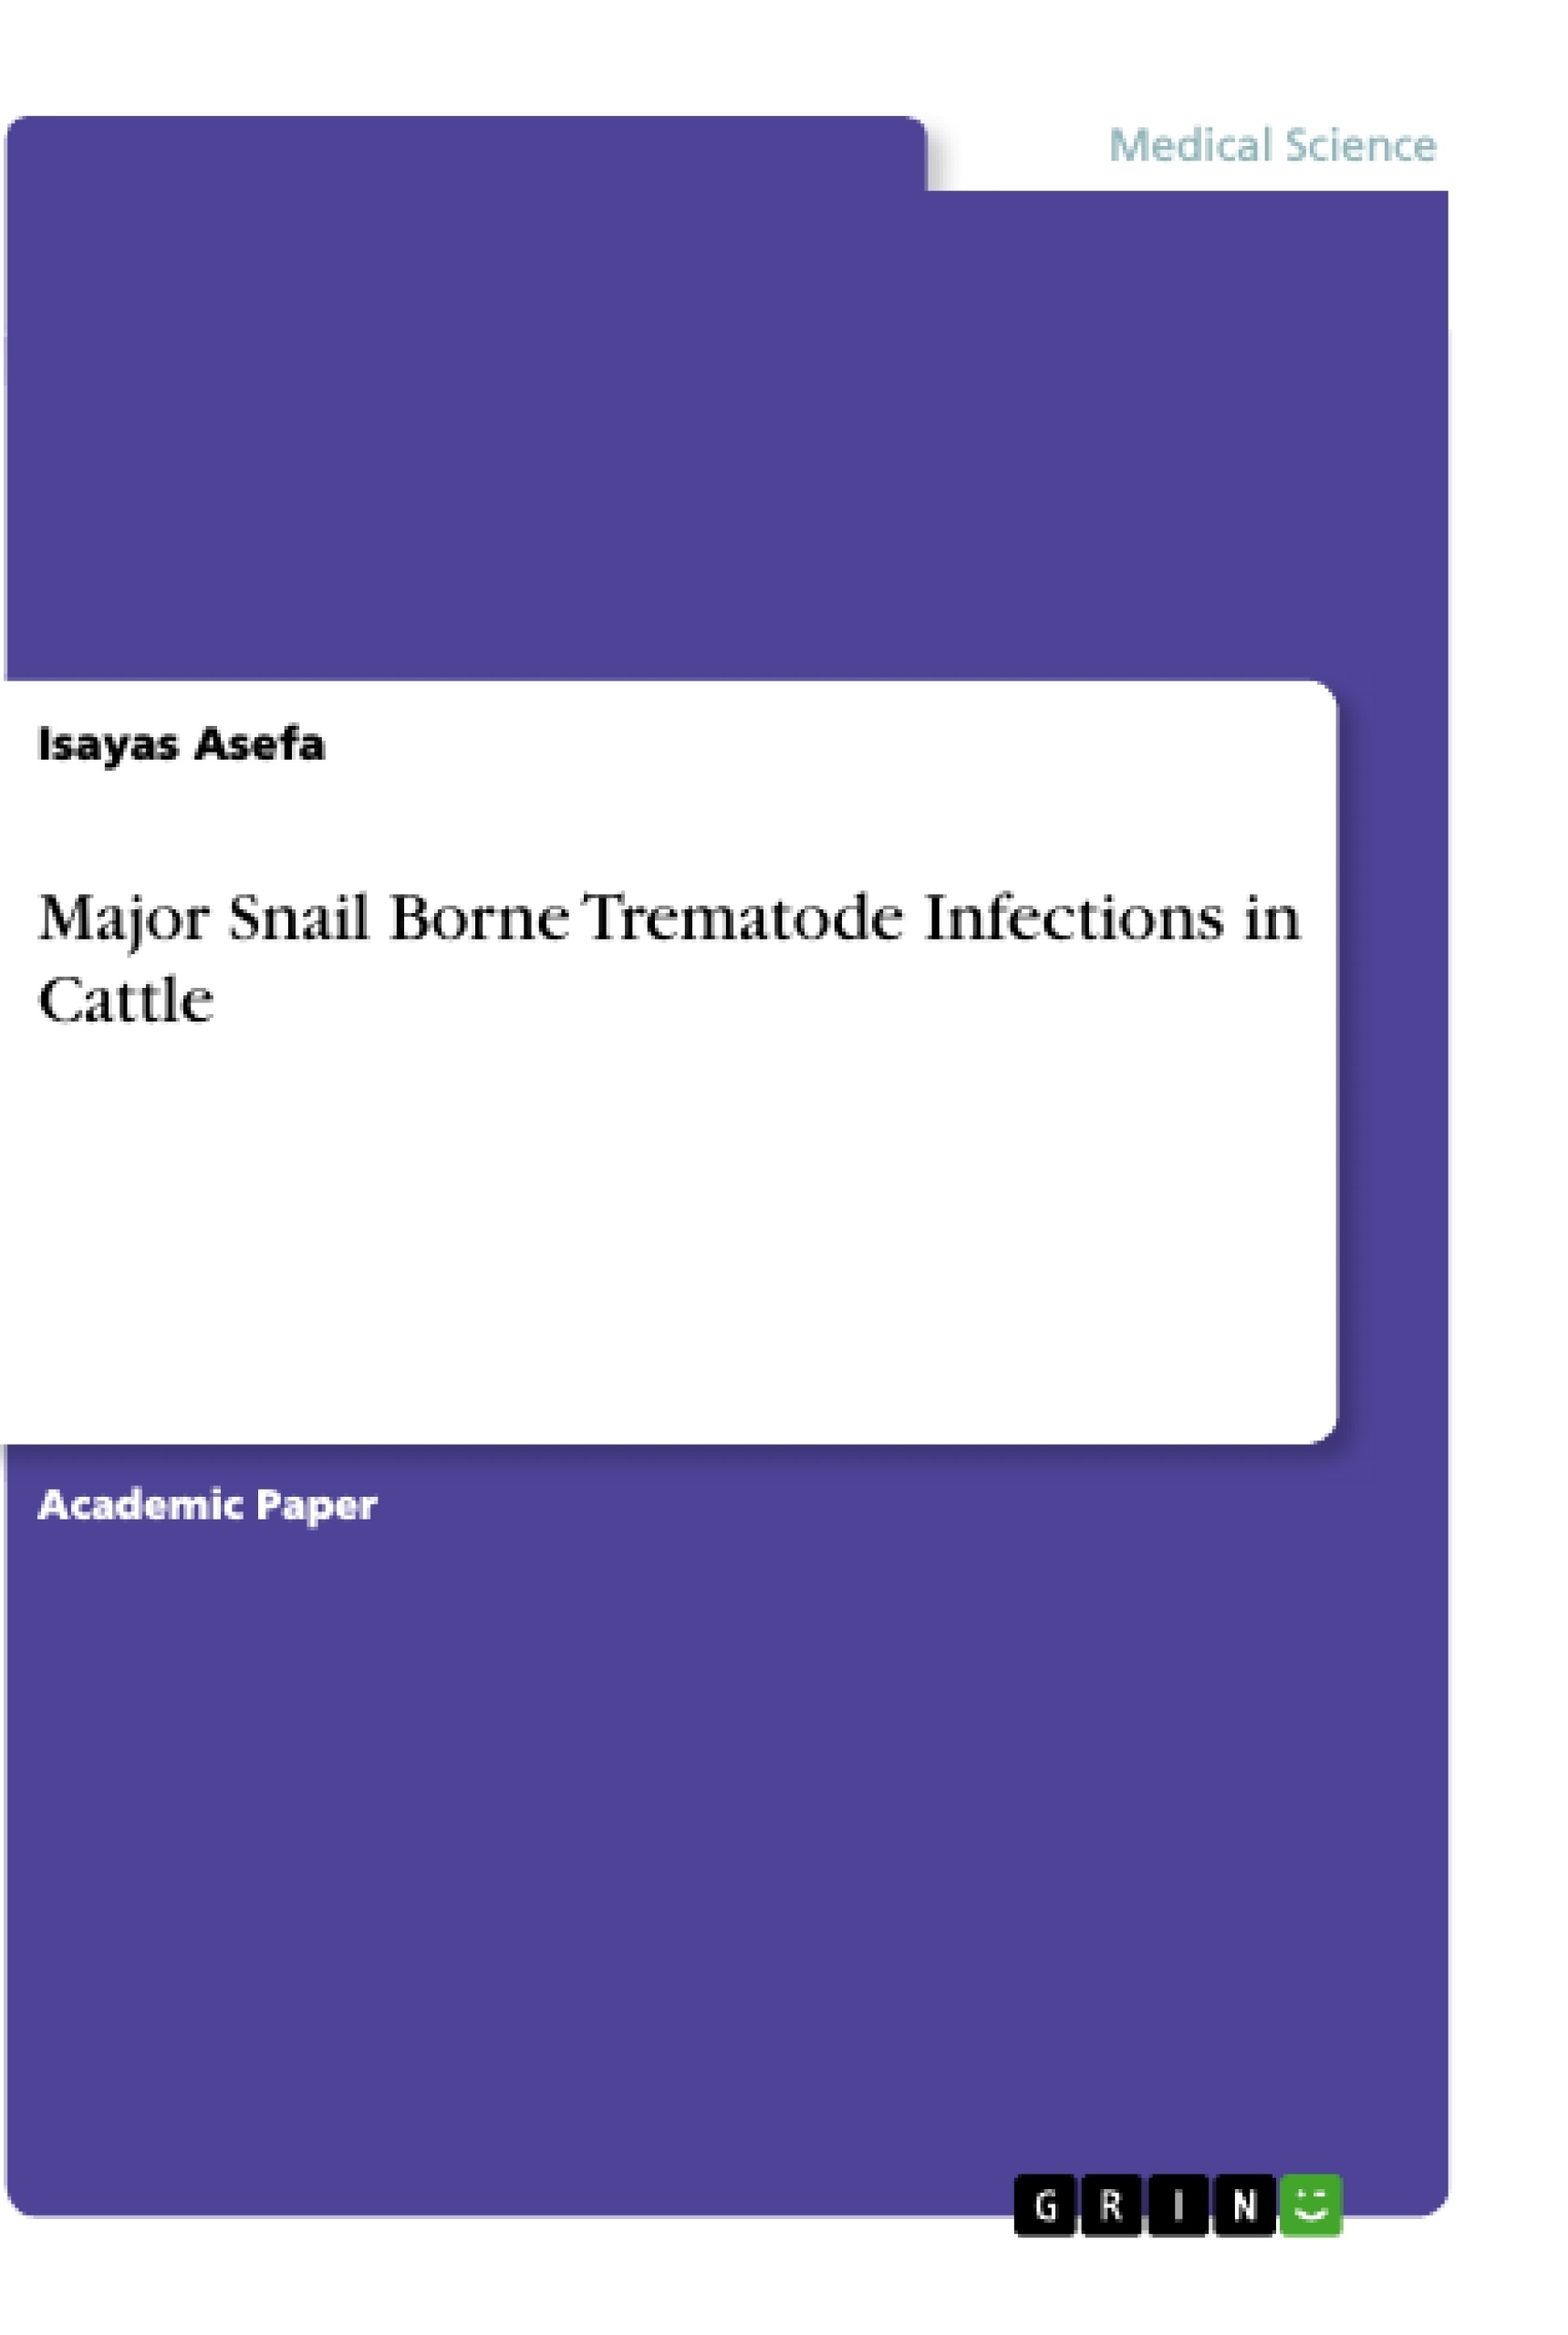 Título: Major Snail Borne Trematode Infections in Cattle